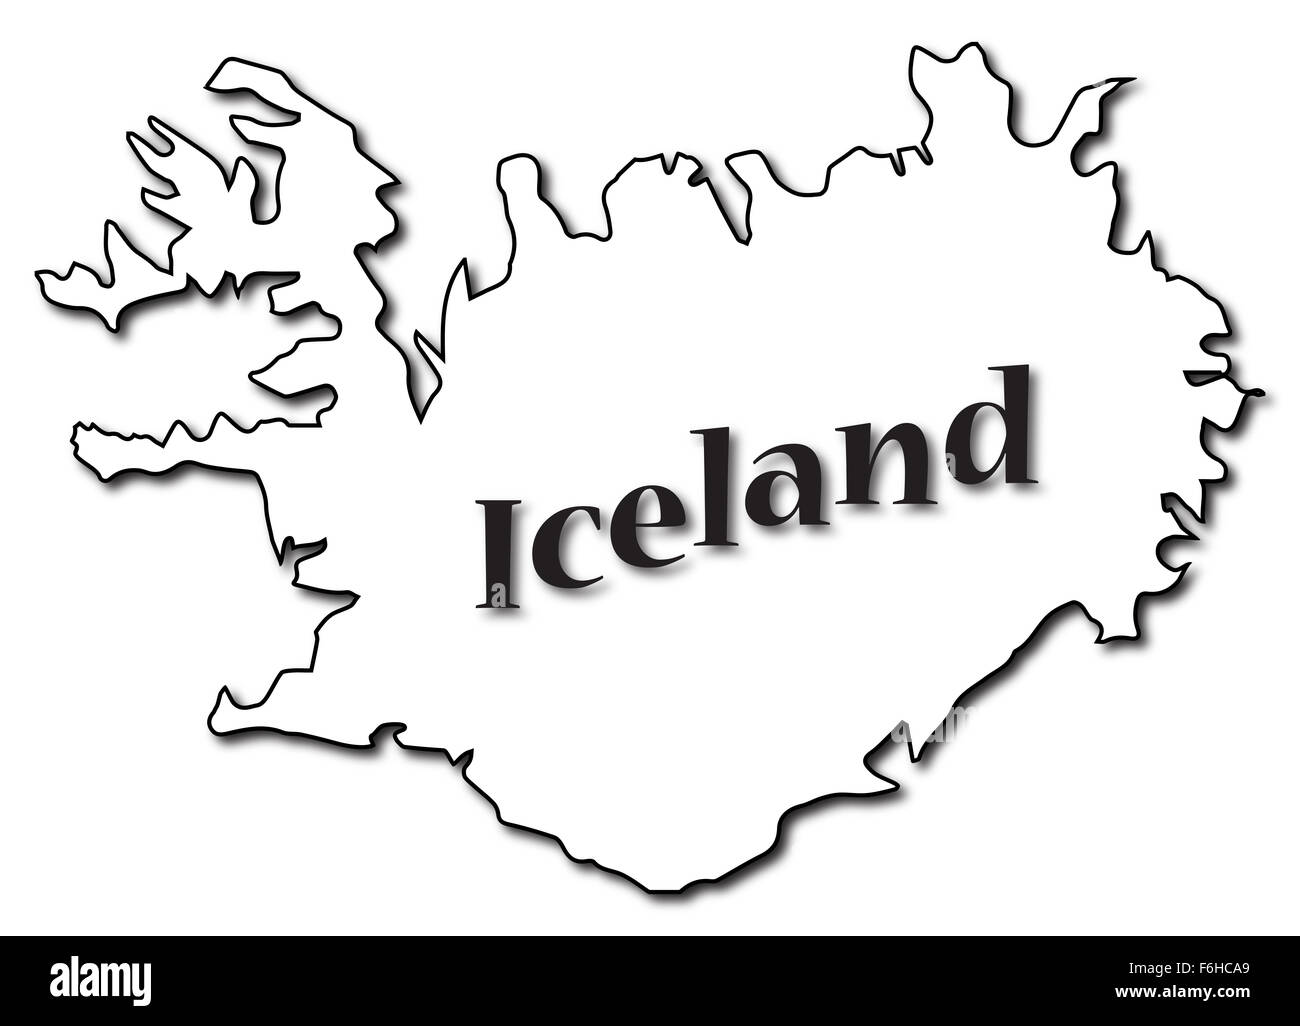 An Iceland map with text and a shadow isolated on a white background Stock Photo